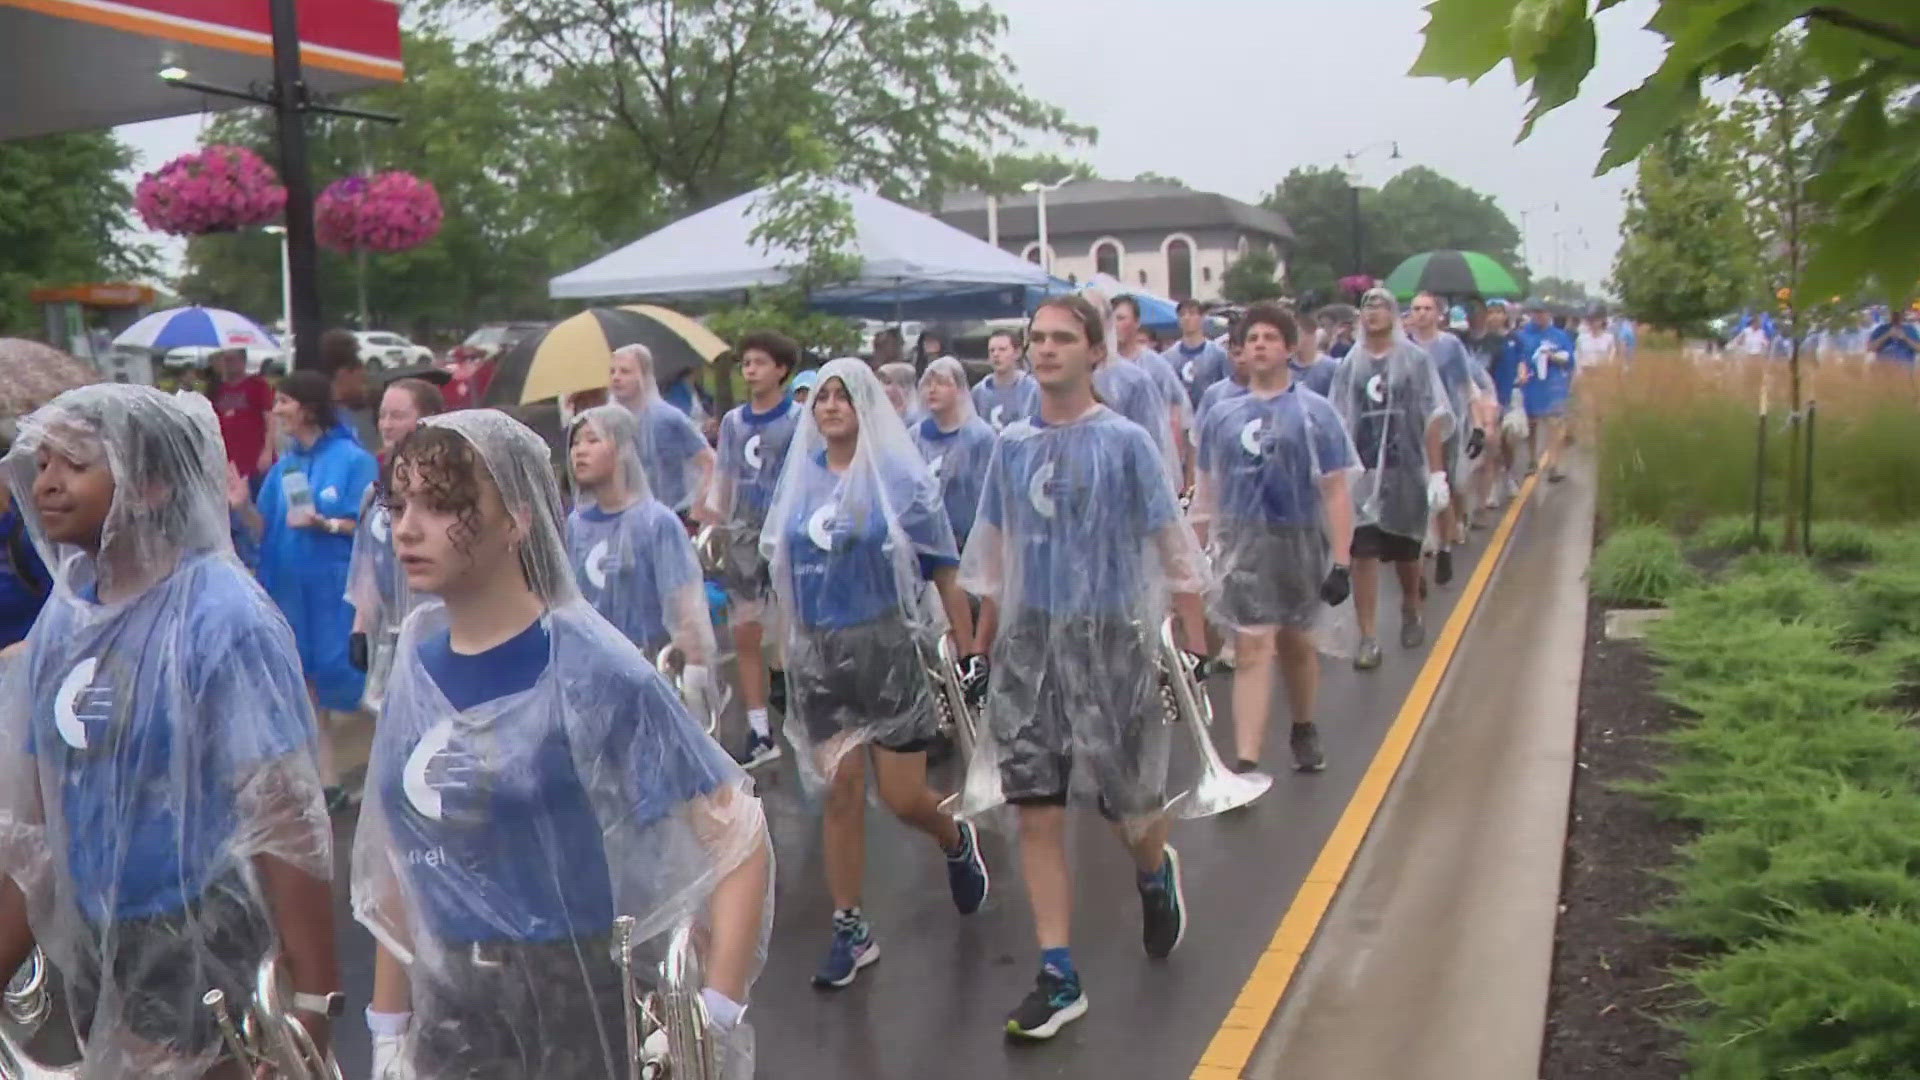 CarmelFest went on as planned, with a parade kicking off today's events.